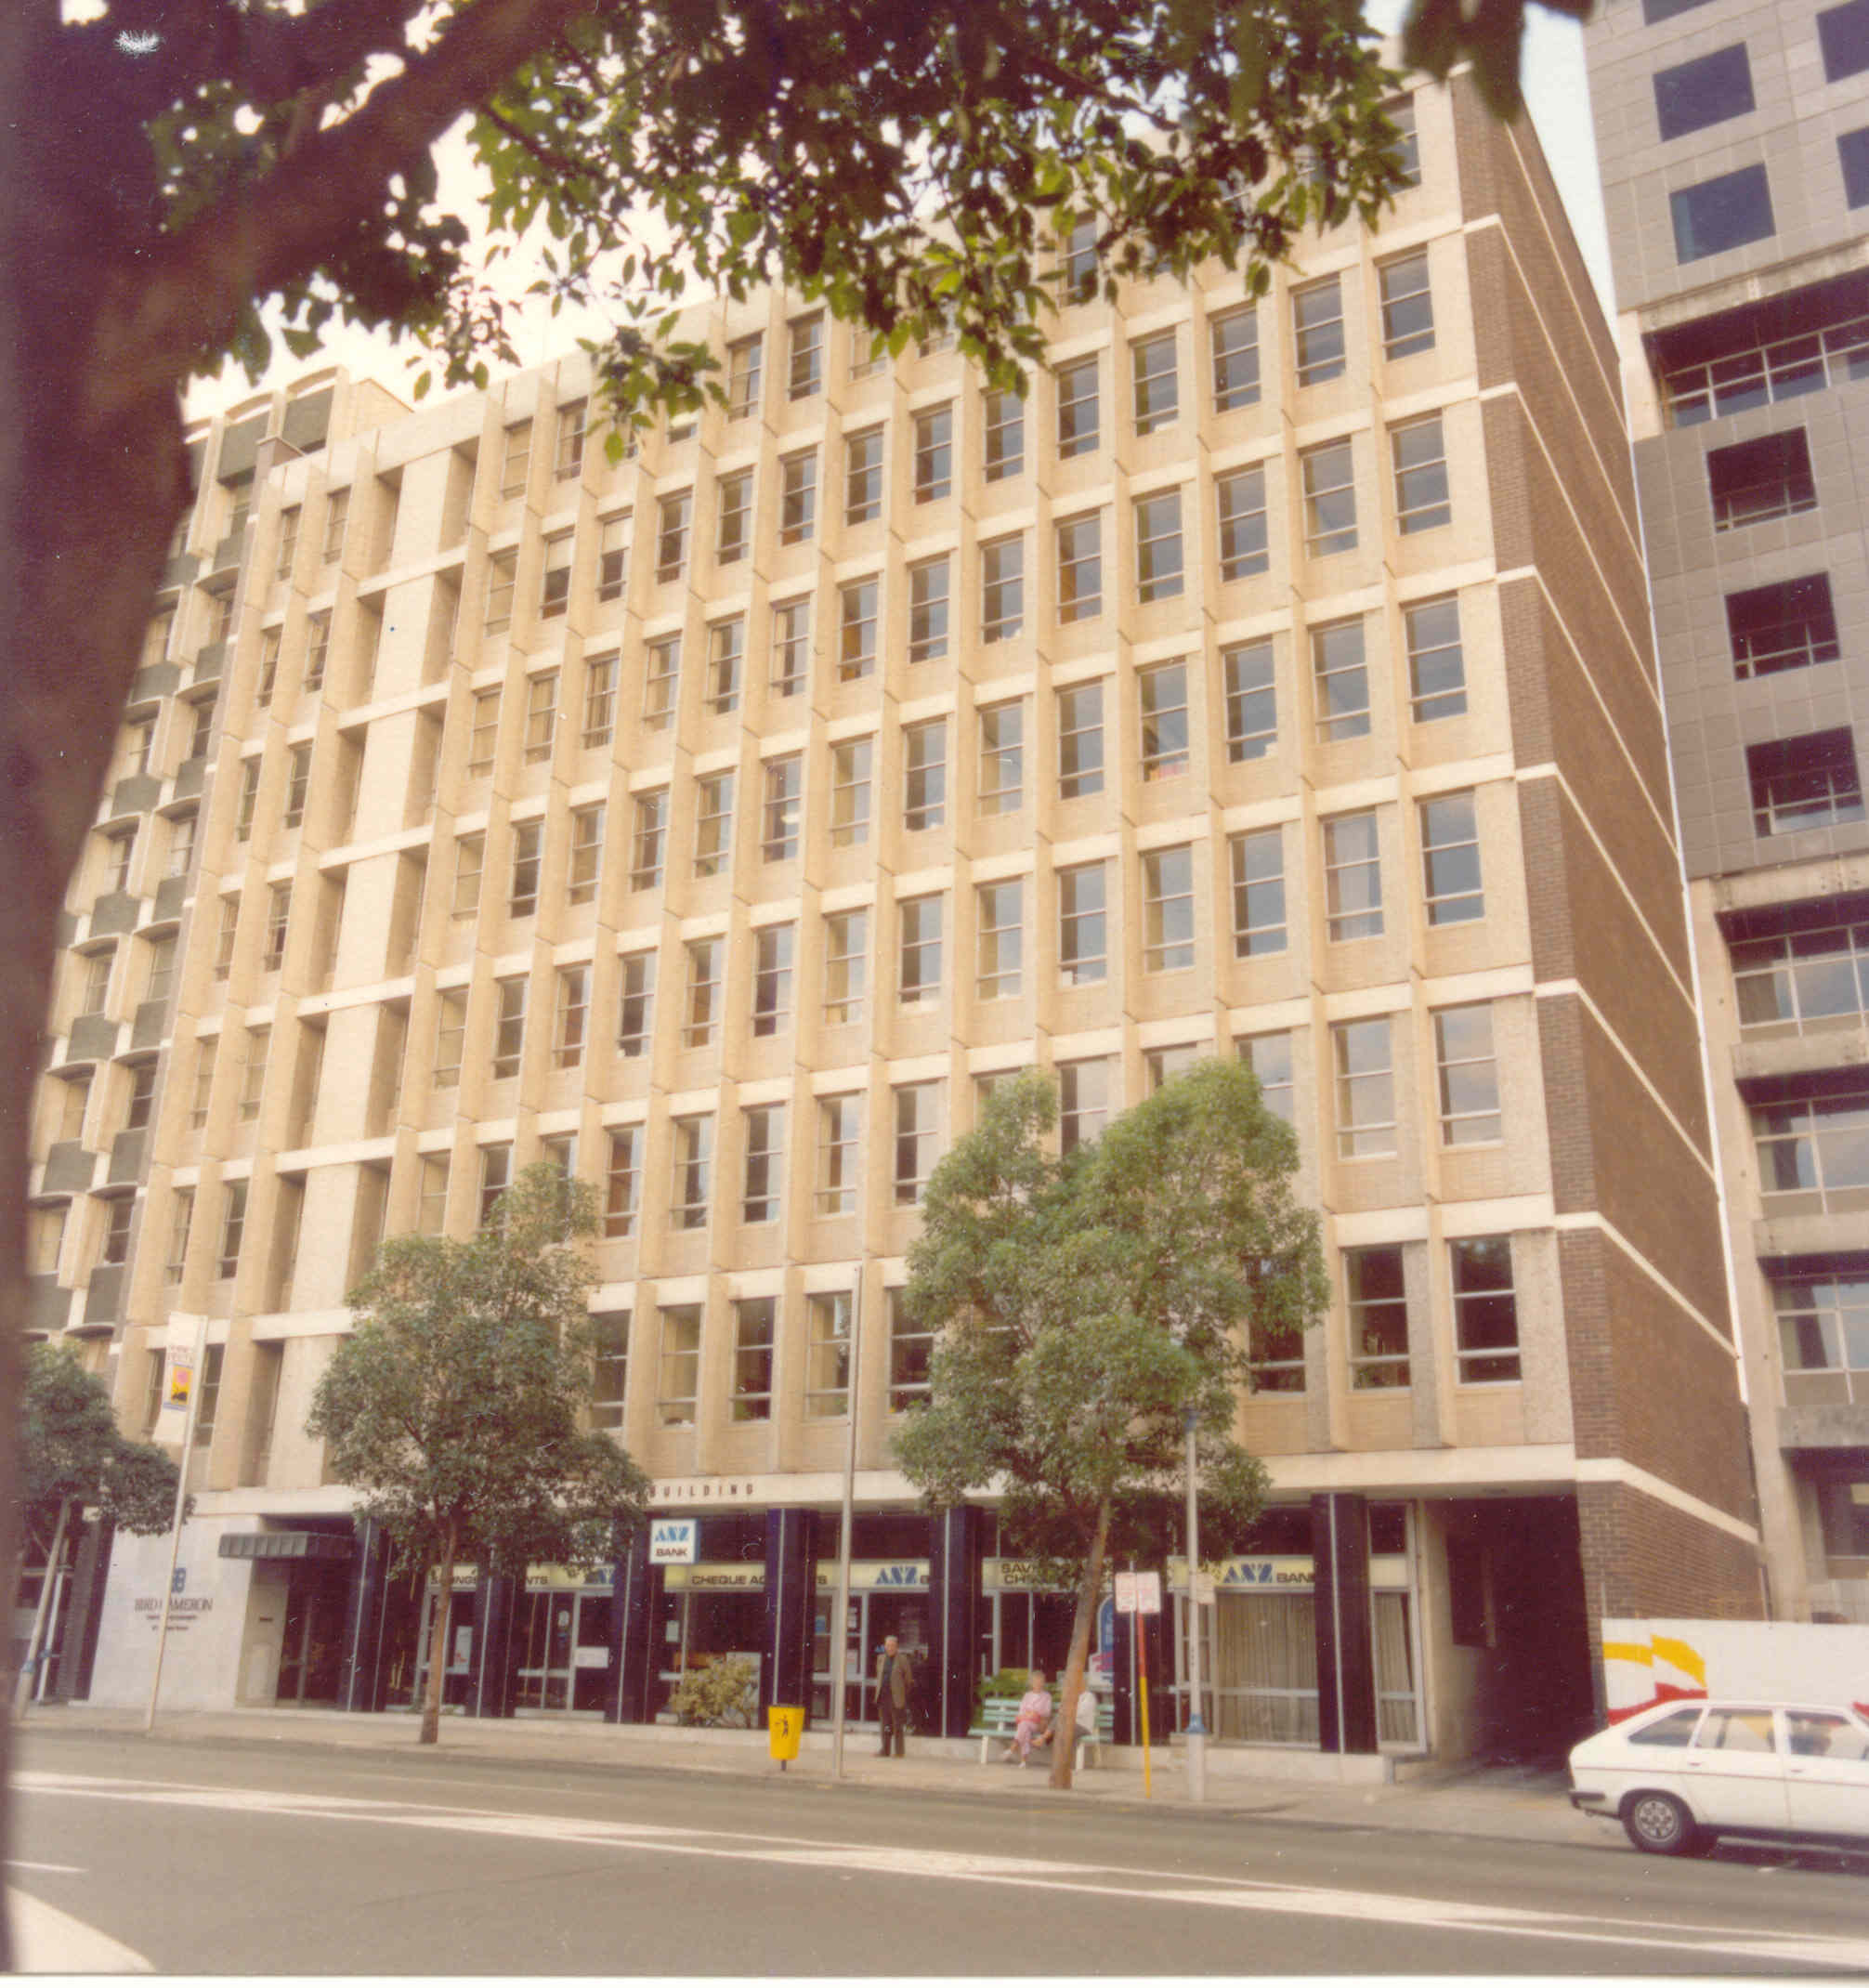 The RSM building in 1965.